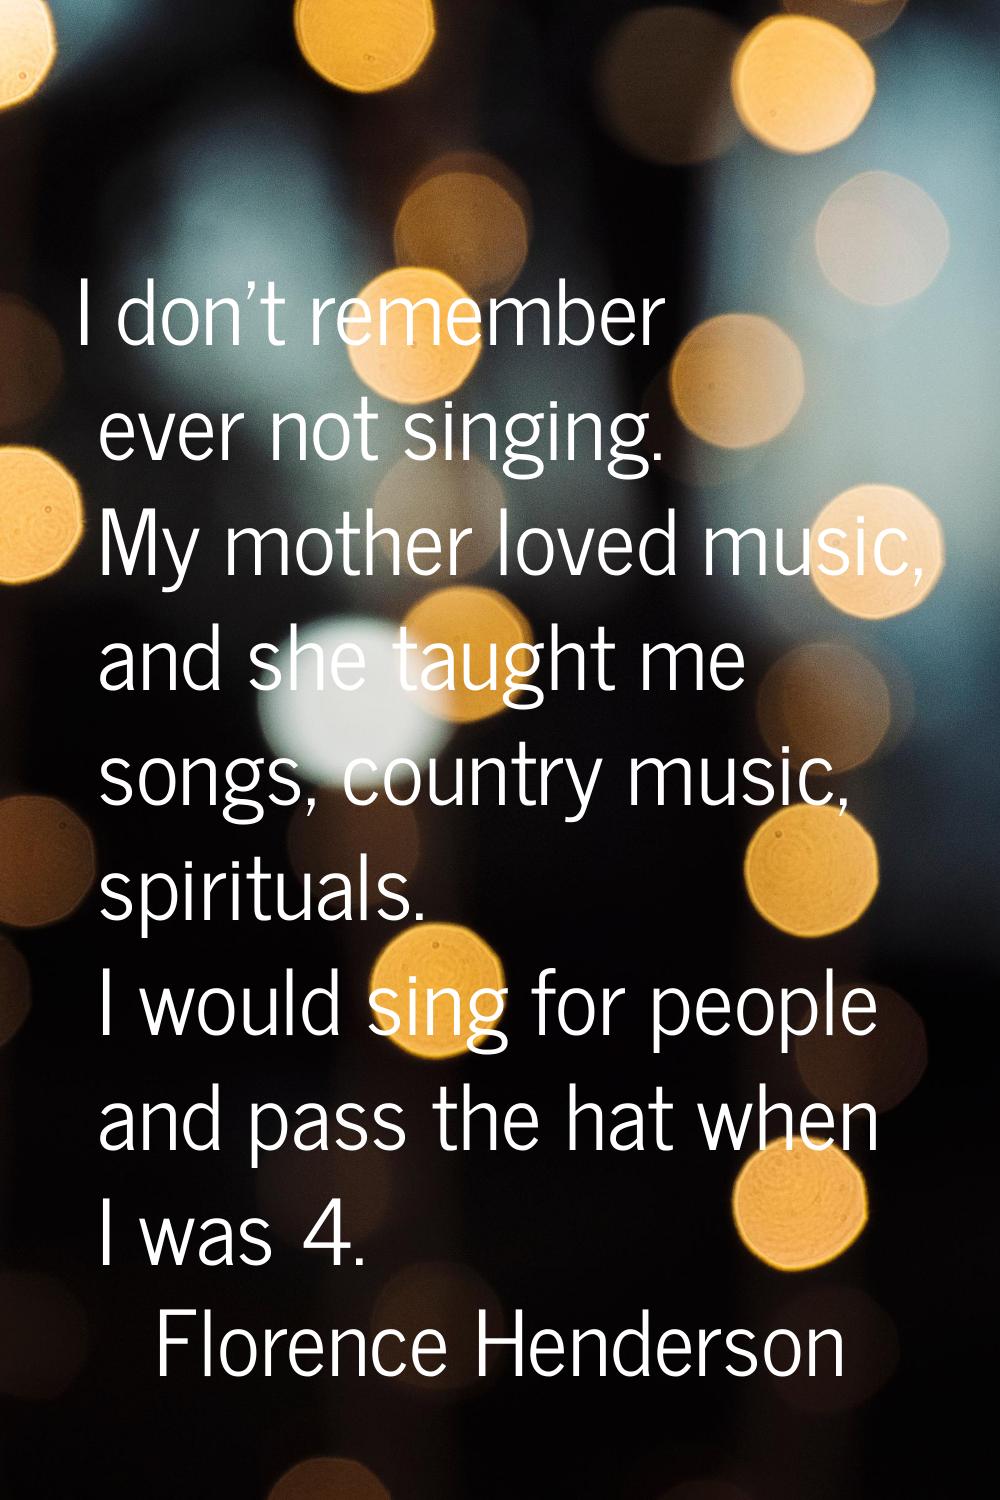 I don't remember ever not singing. My mother loved music, and she taught me songs, country music, s